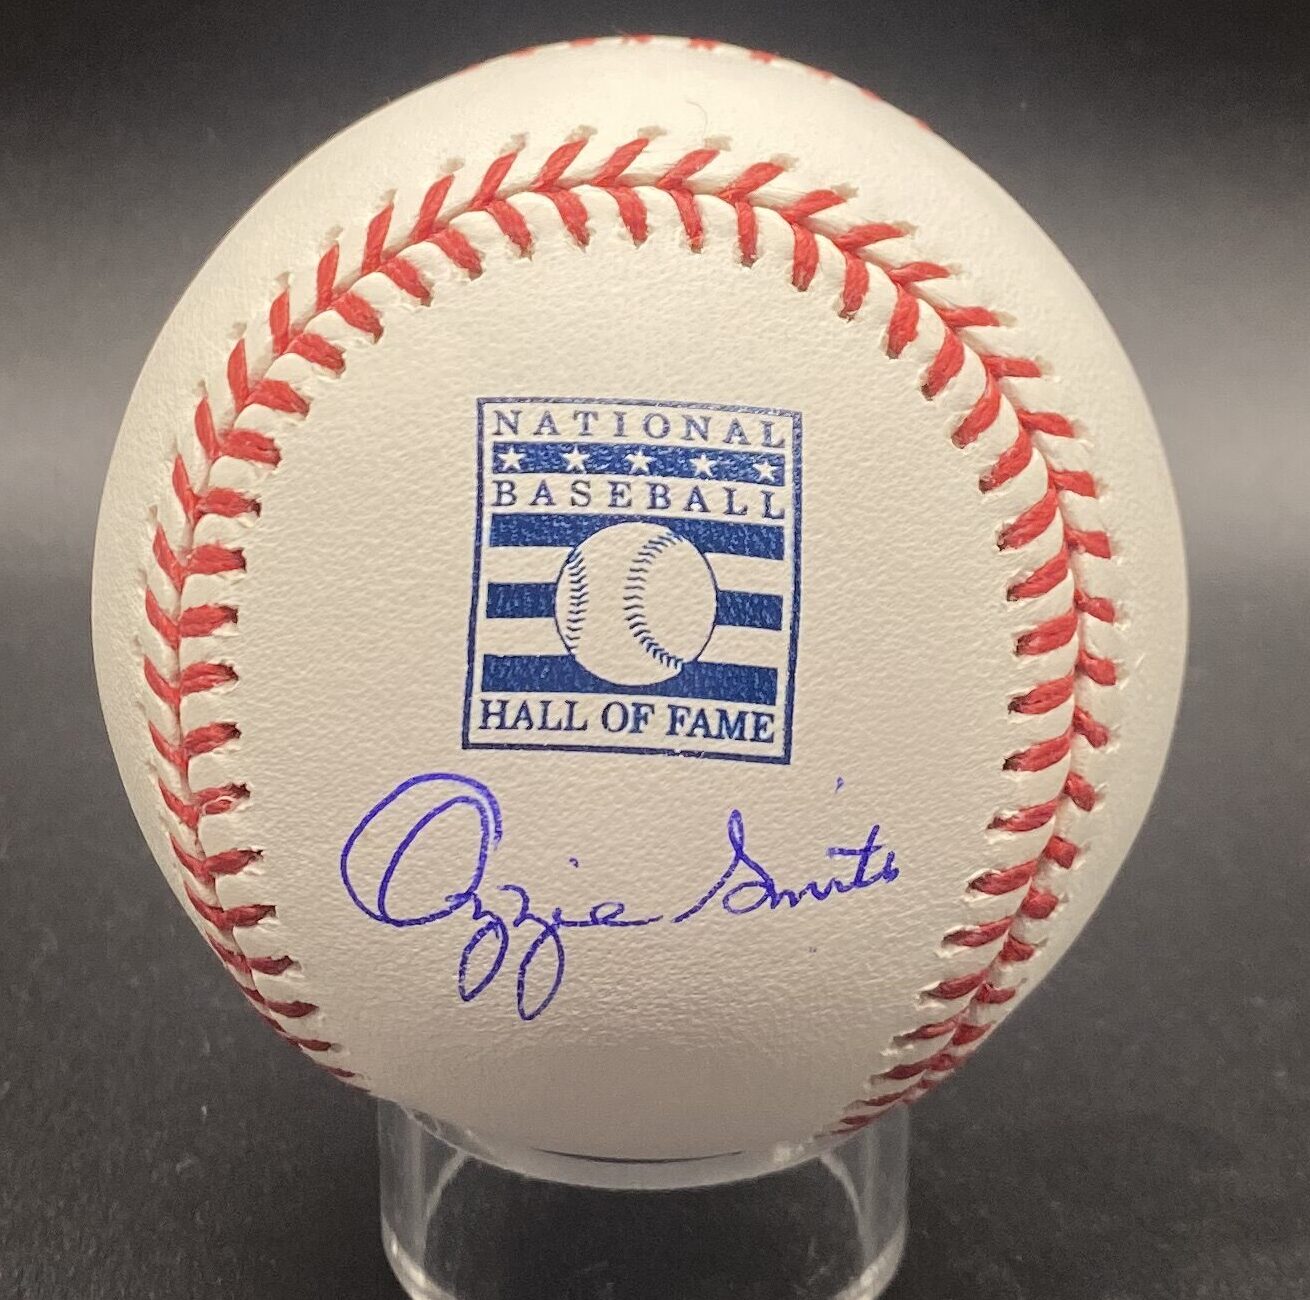 Ozzie Smith St. Louis Cardinals Autographed Baseball - Hand Painted by  Artist Stadium Custom Kicks - #1 of Limited Edition 1